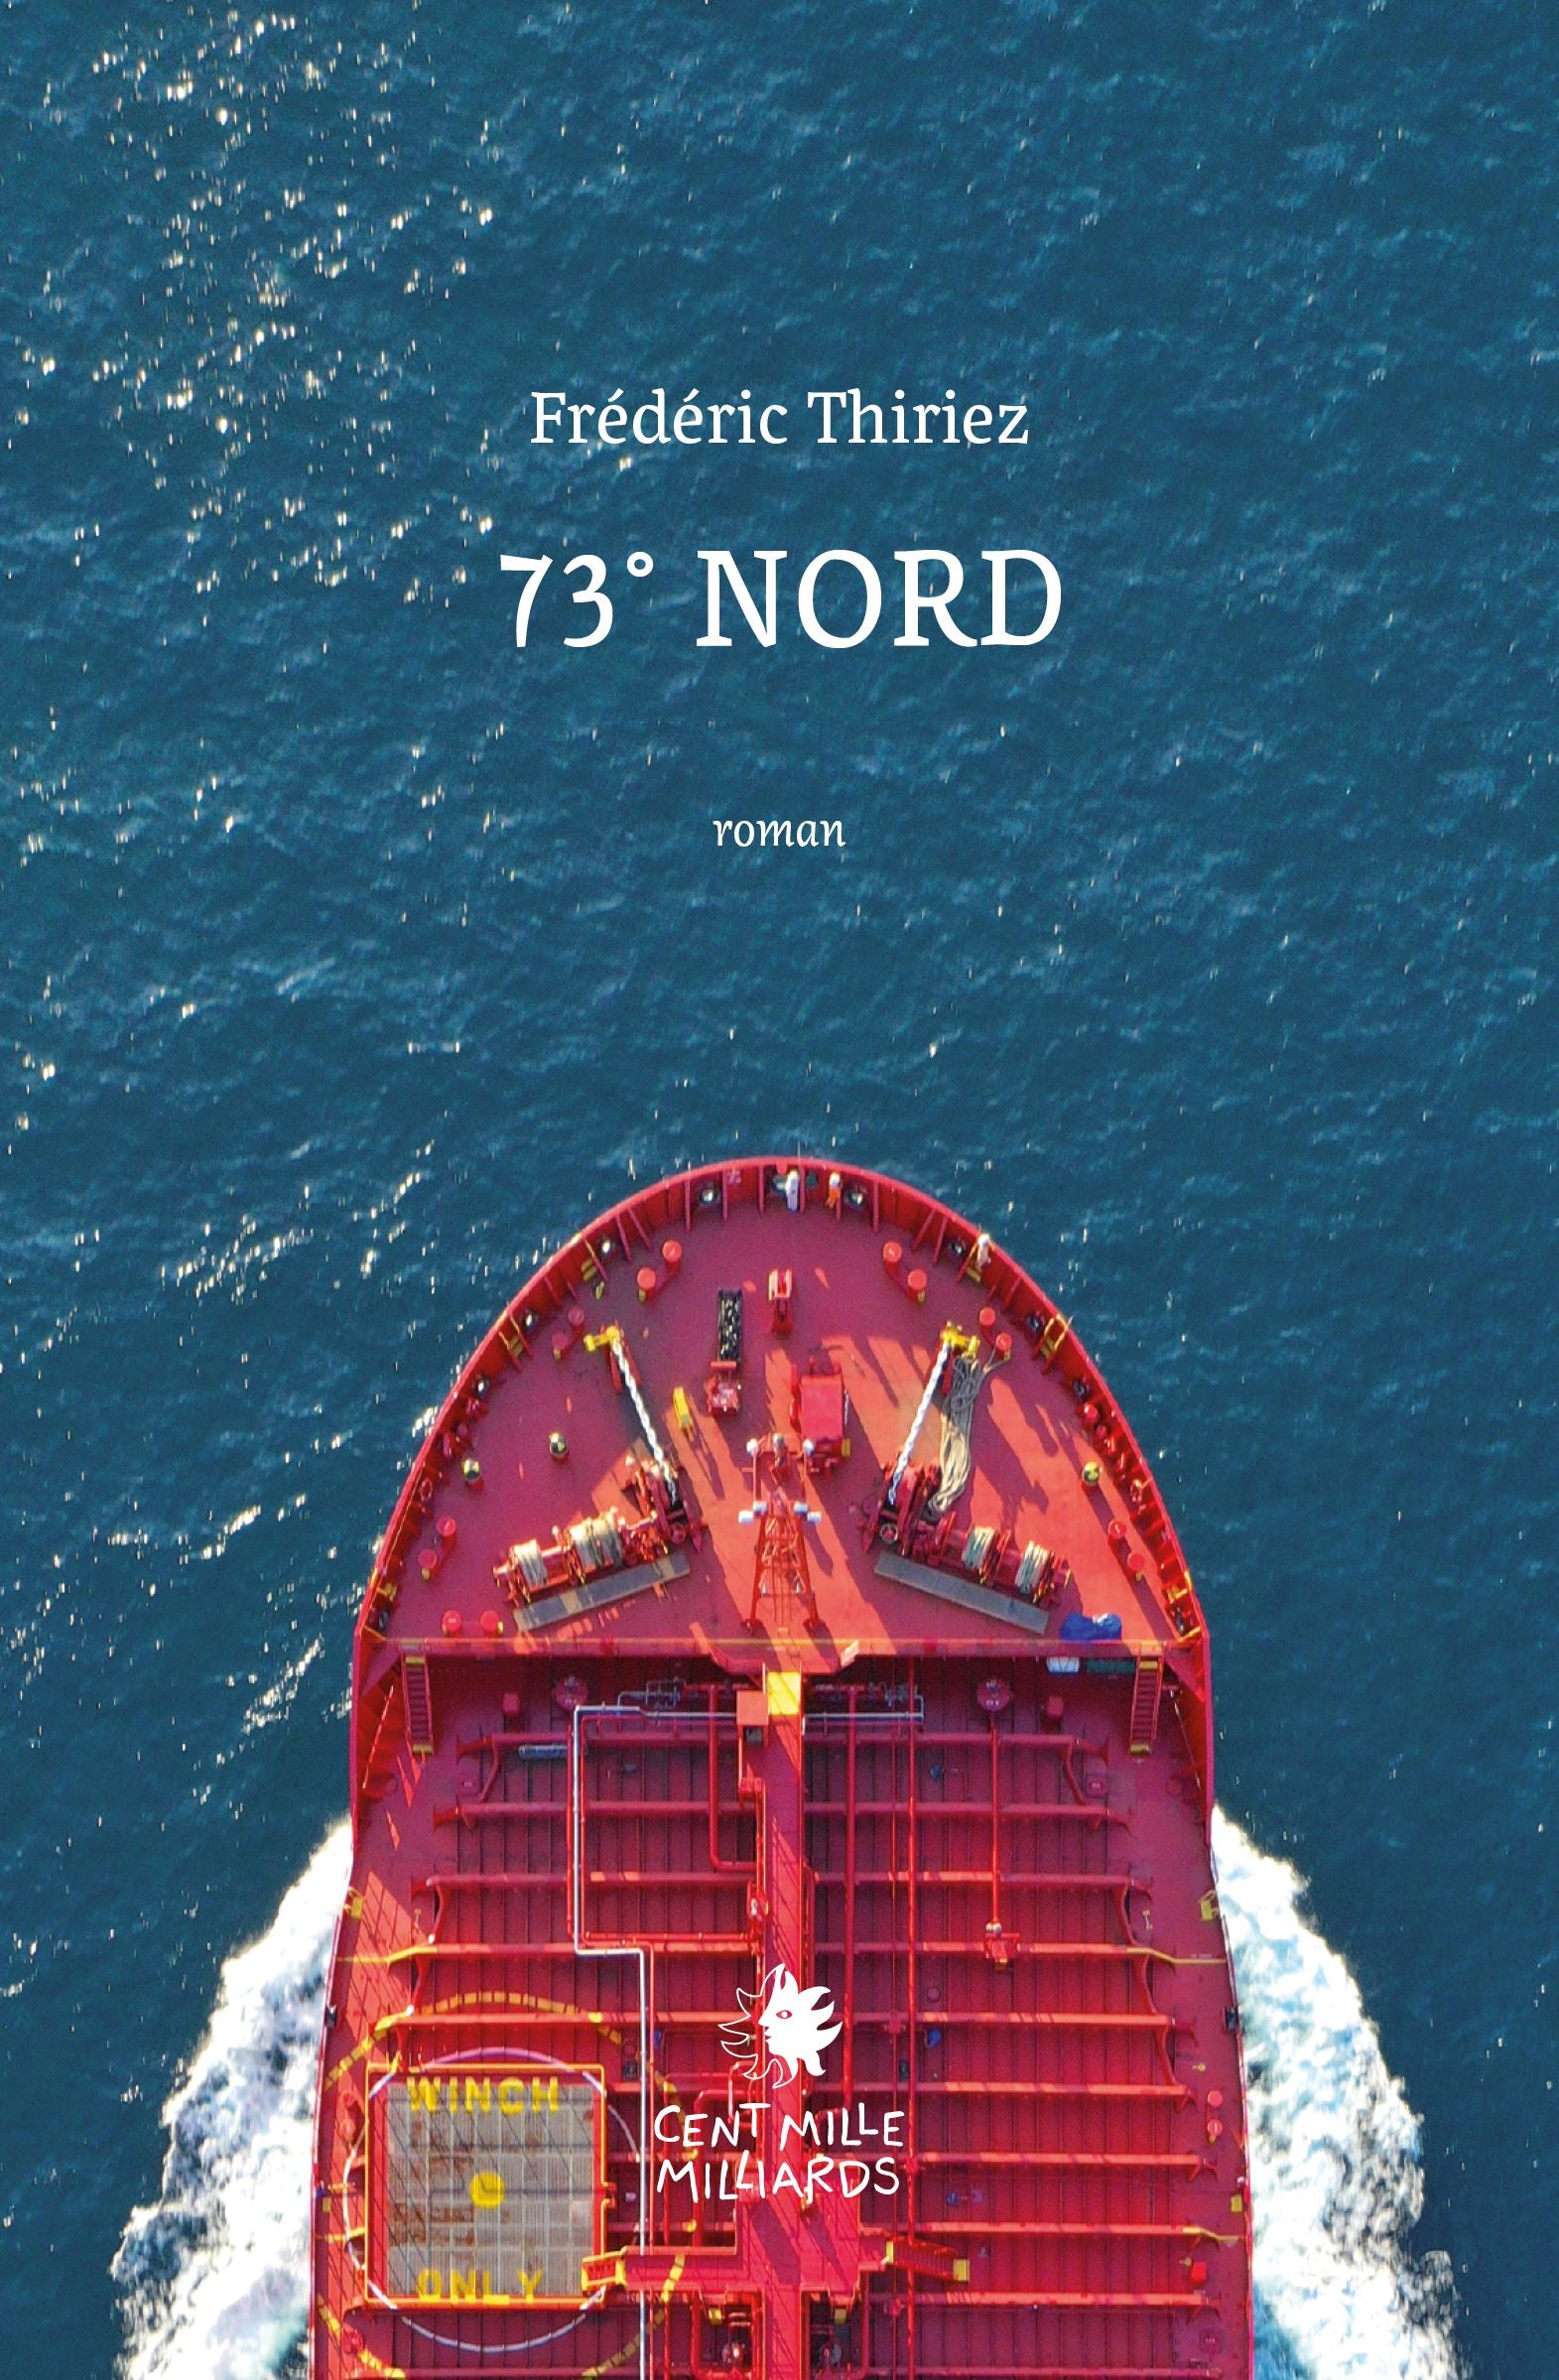 73° nord